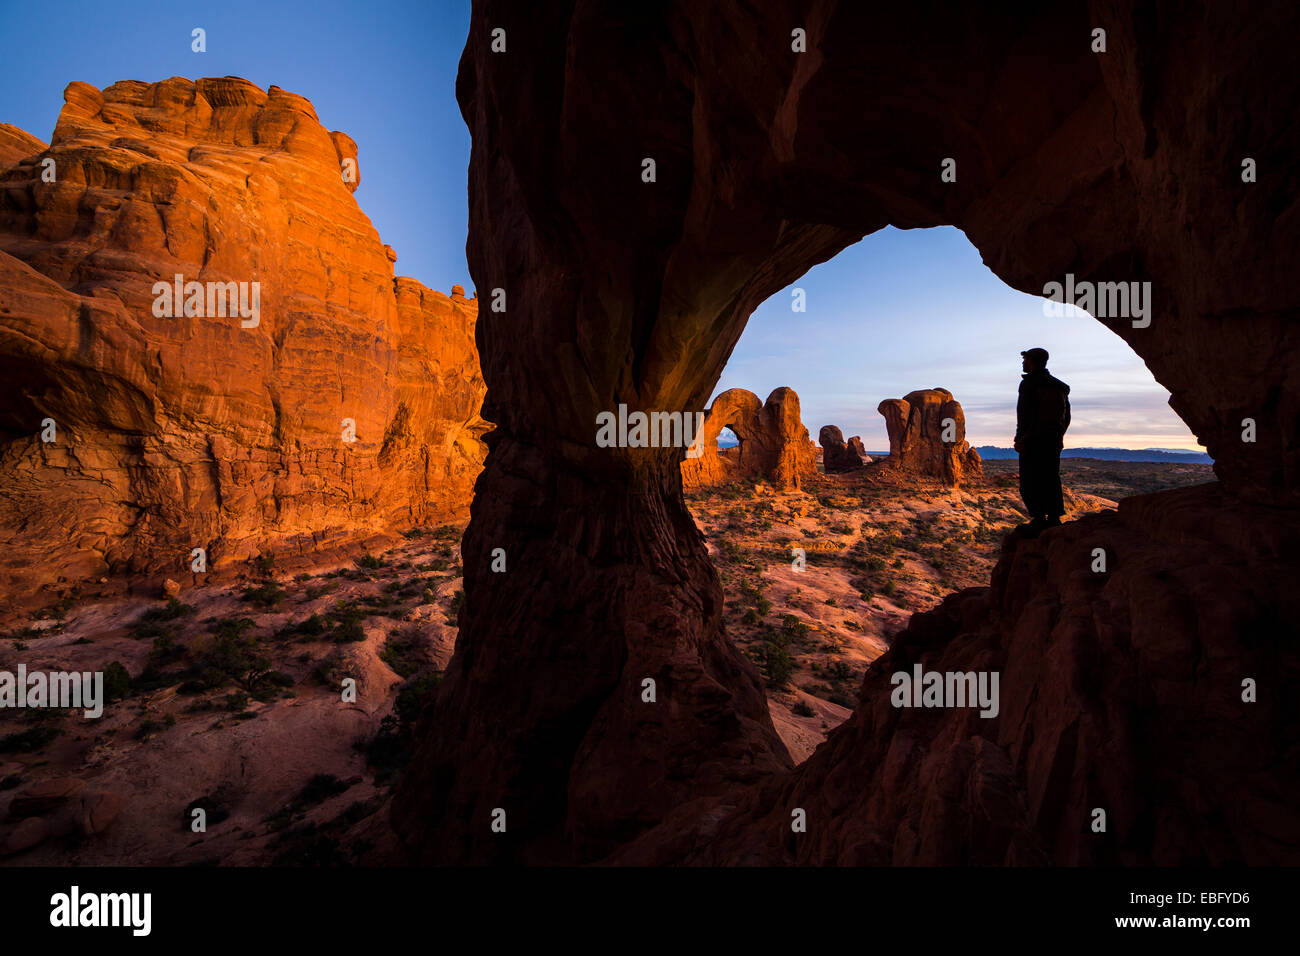 Arch in Arches National Park, Moab, Utah. Stock Photo